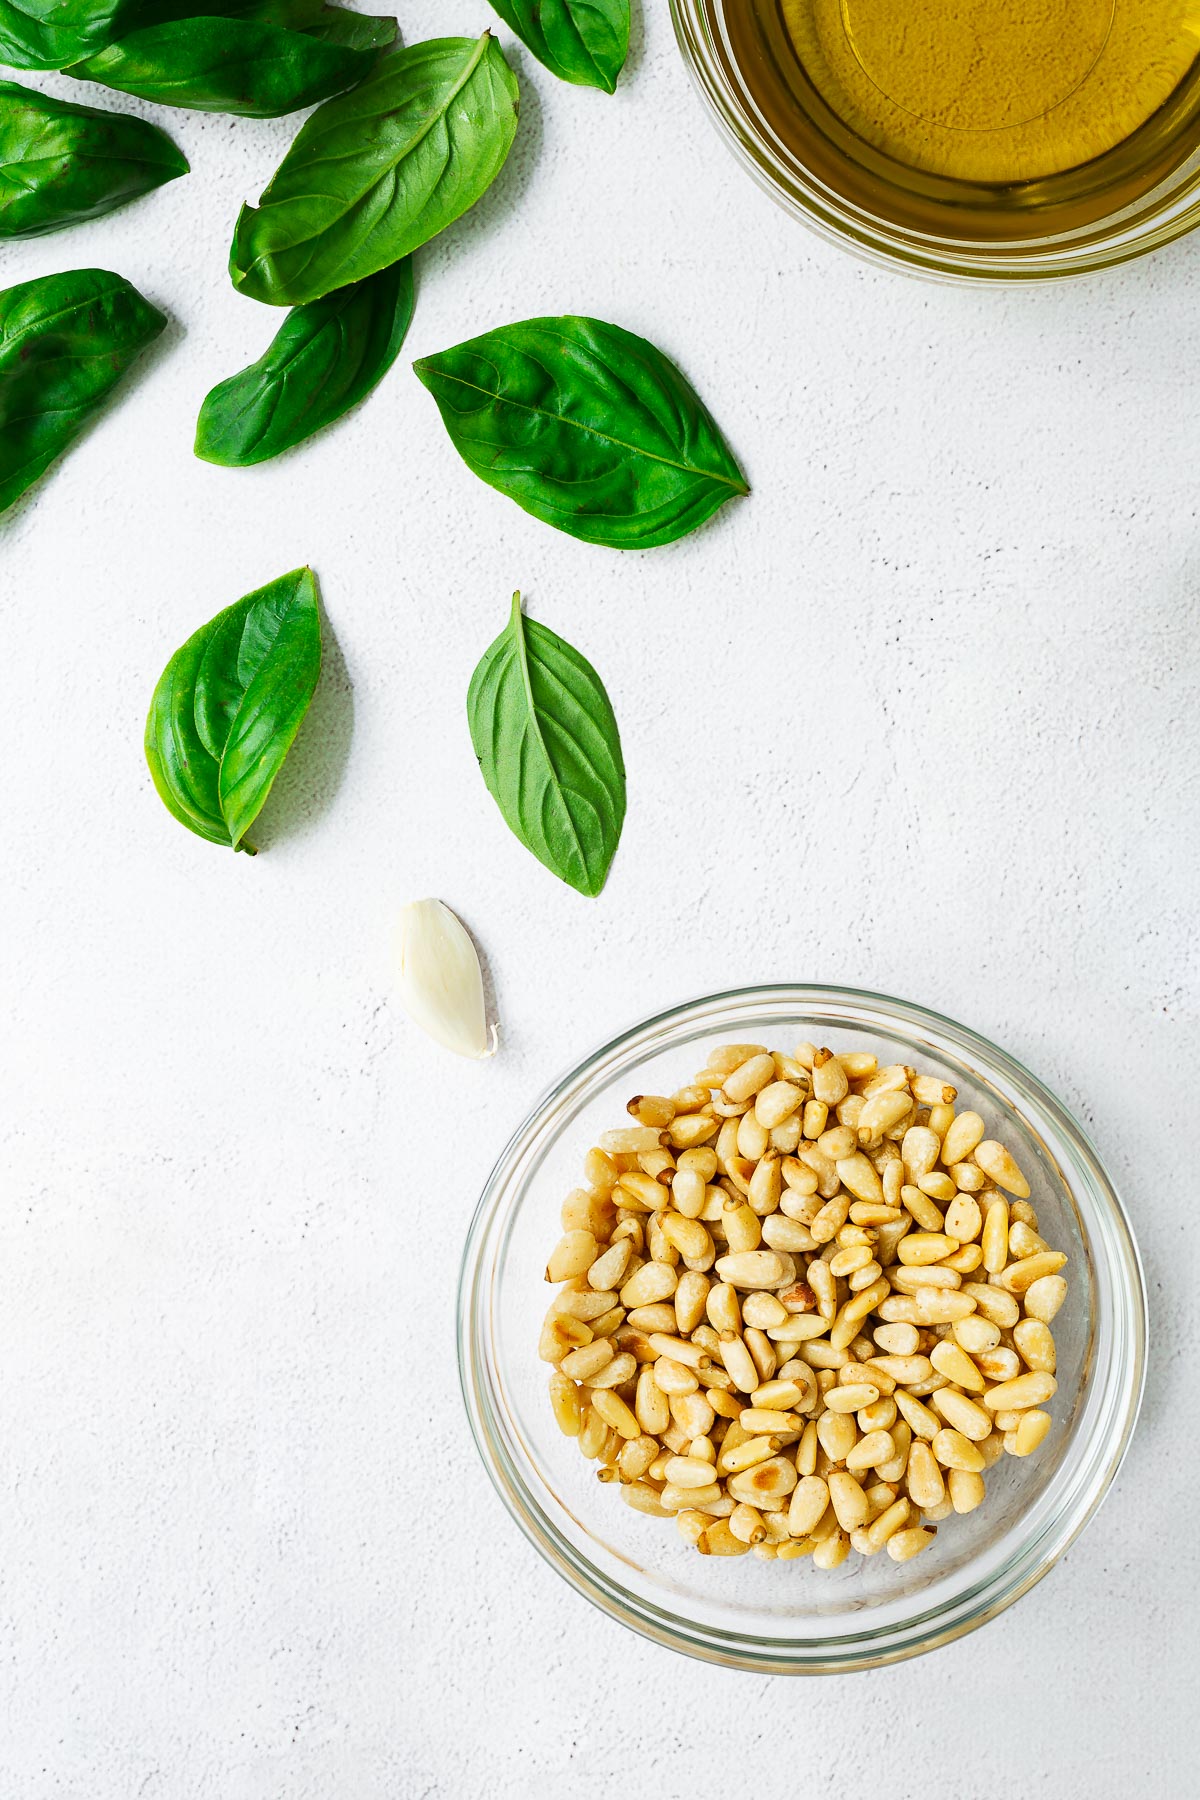 Top down view of pine nuts and basil pesto ingredients.